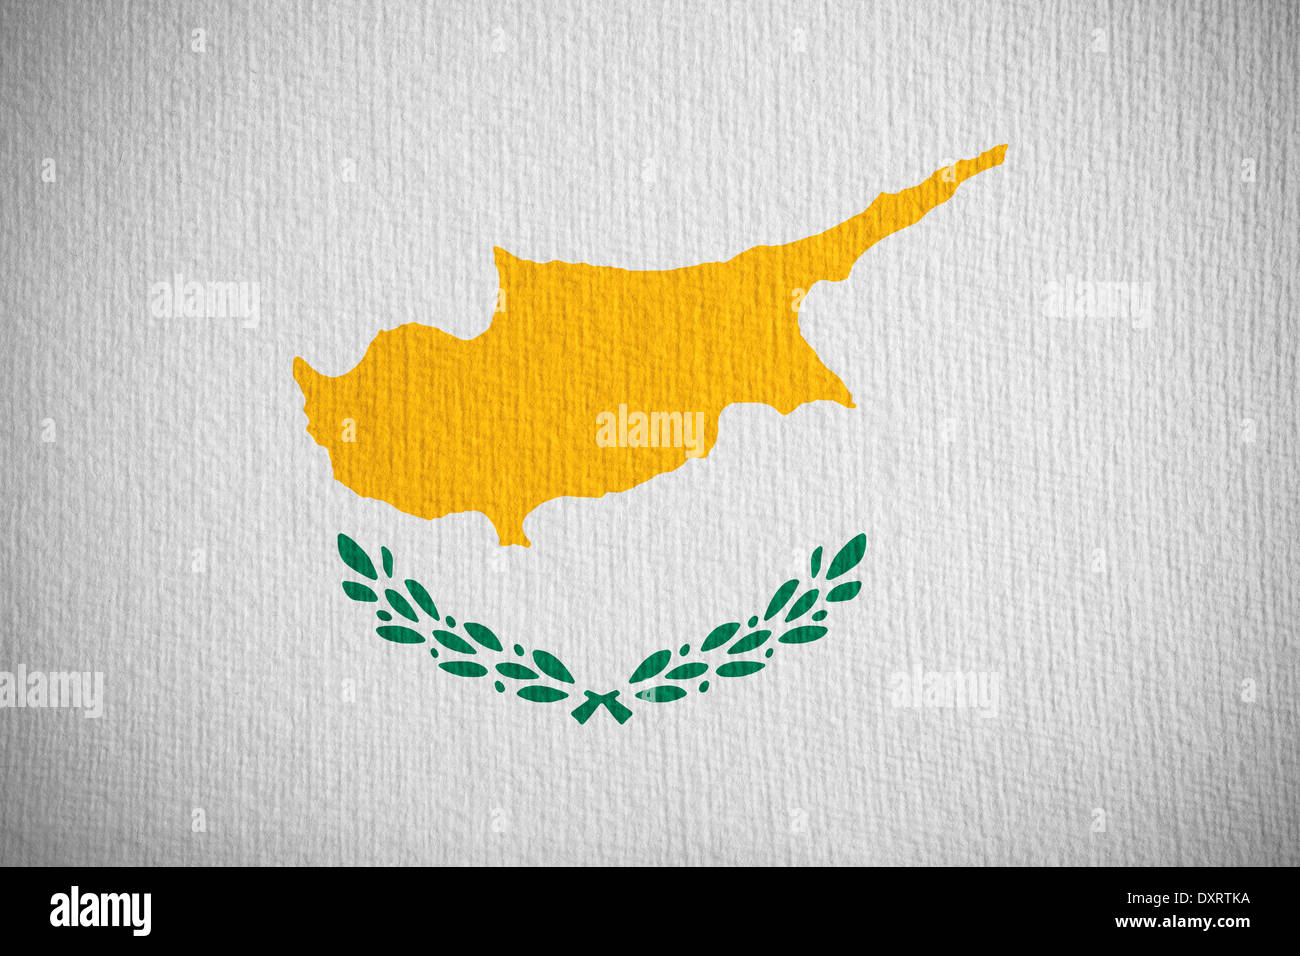 flag of Cyprus or Cypriot banner on paper background Stock Photo